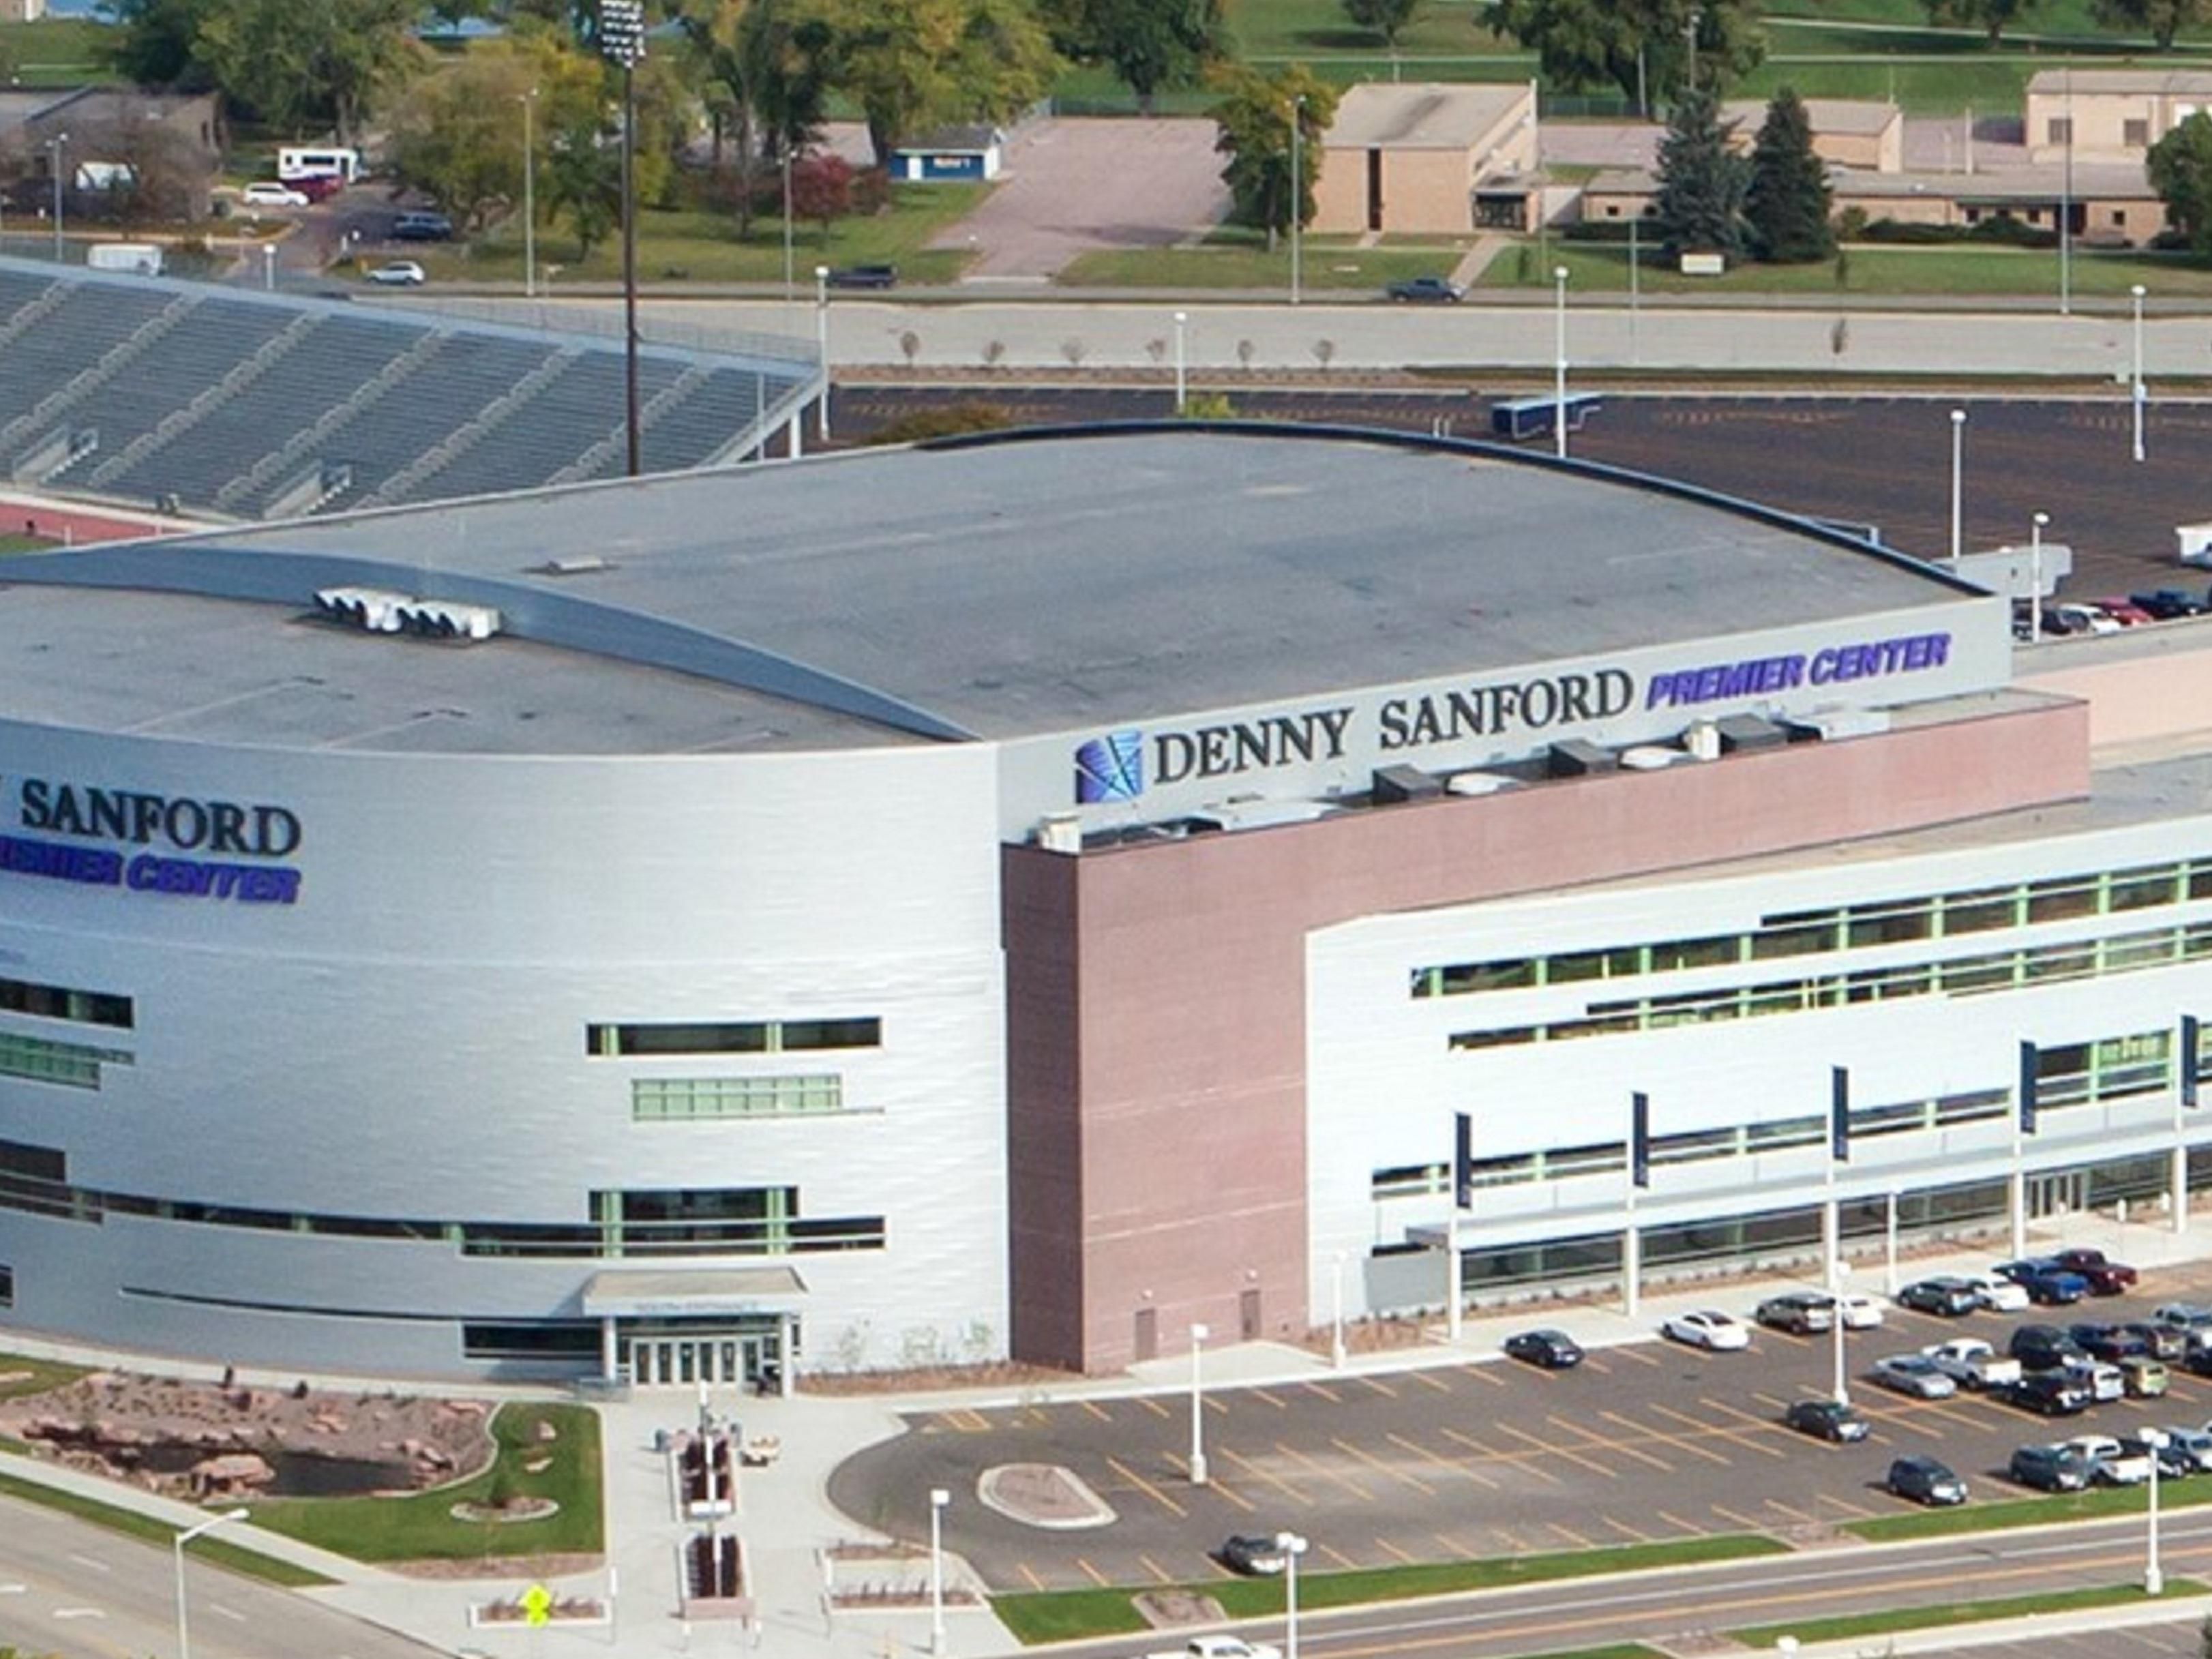 We are within walking distance to Denny Sanford Premier Center Convention Center/Arena and offer shuttle service during large events.  Contact hotel for shuttle info.